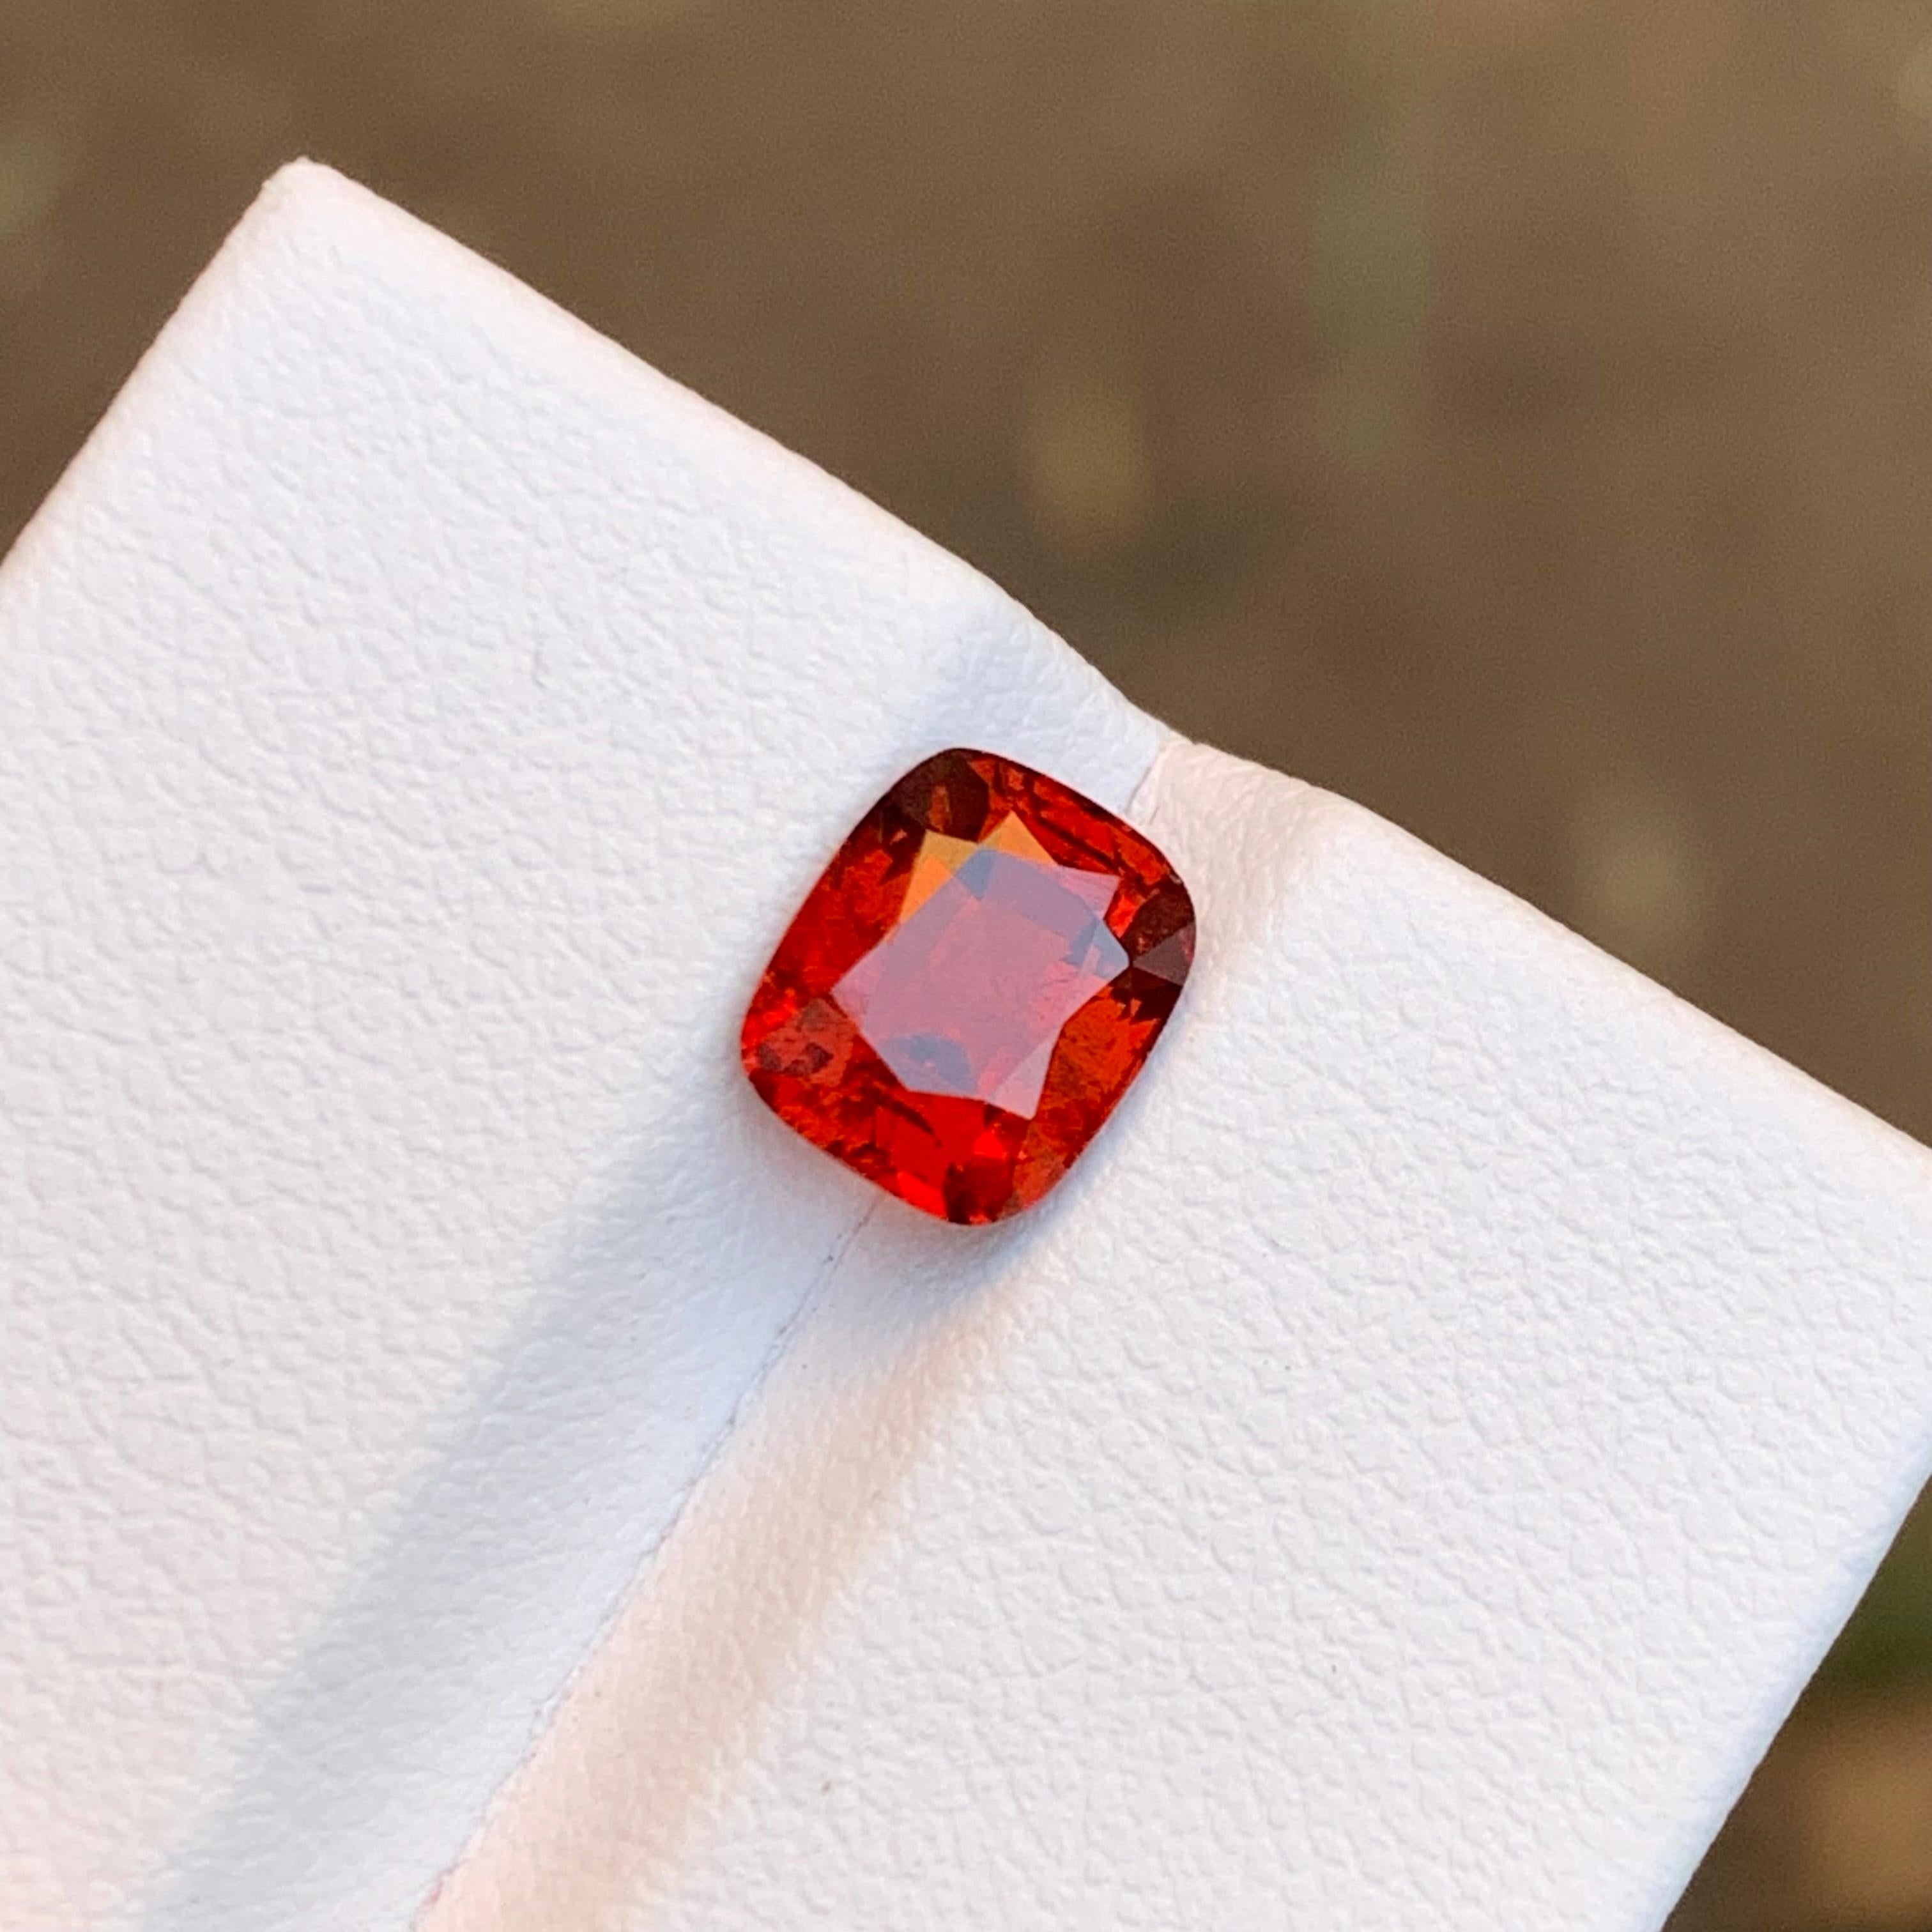 Elevate your jewelry creations with our Deep Orange Natural Spessartine/Mandarin Garnet Loose Gemstone. Meticulously crafted in a dazzling cushion cut design, this gemstone boasts a sparkling luster that captivates the eye. Its slightly included